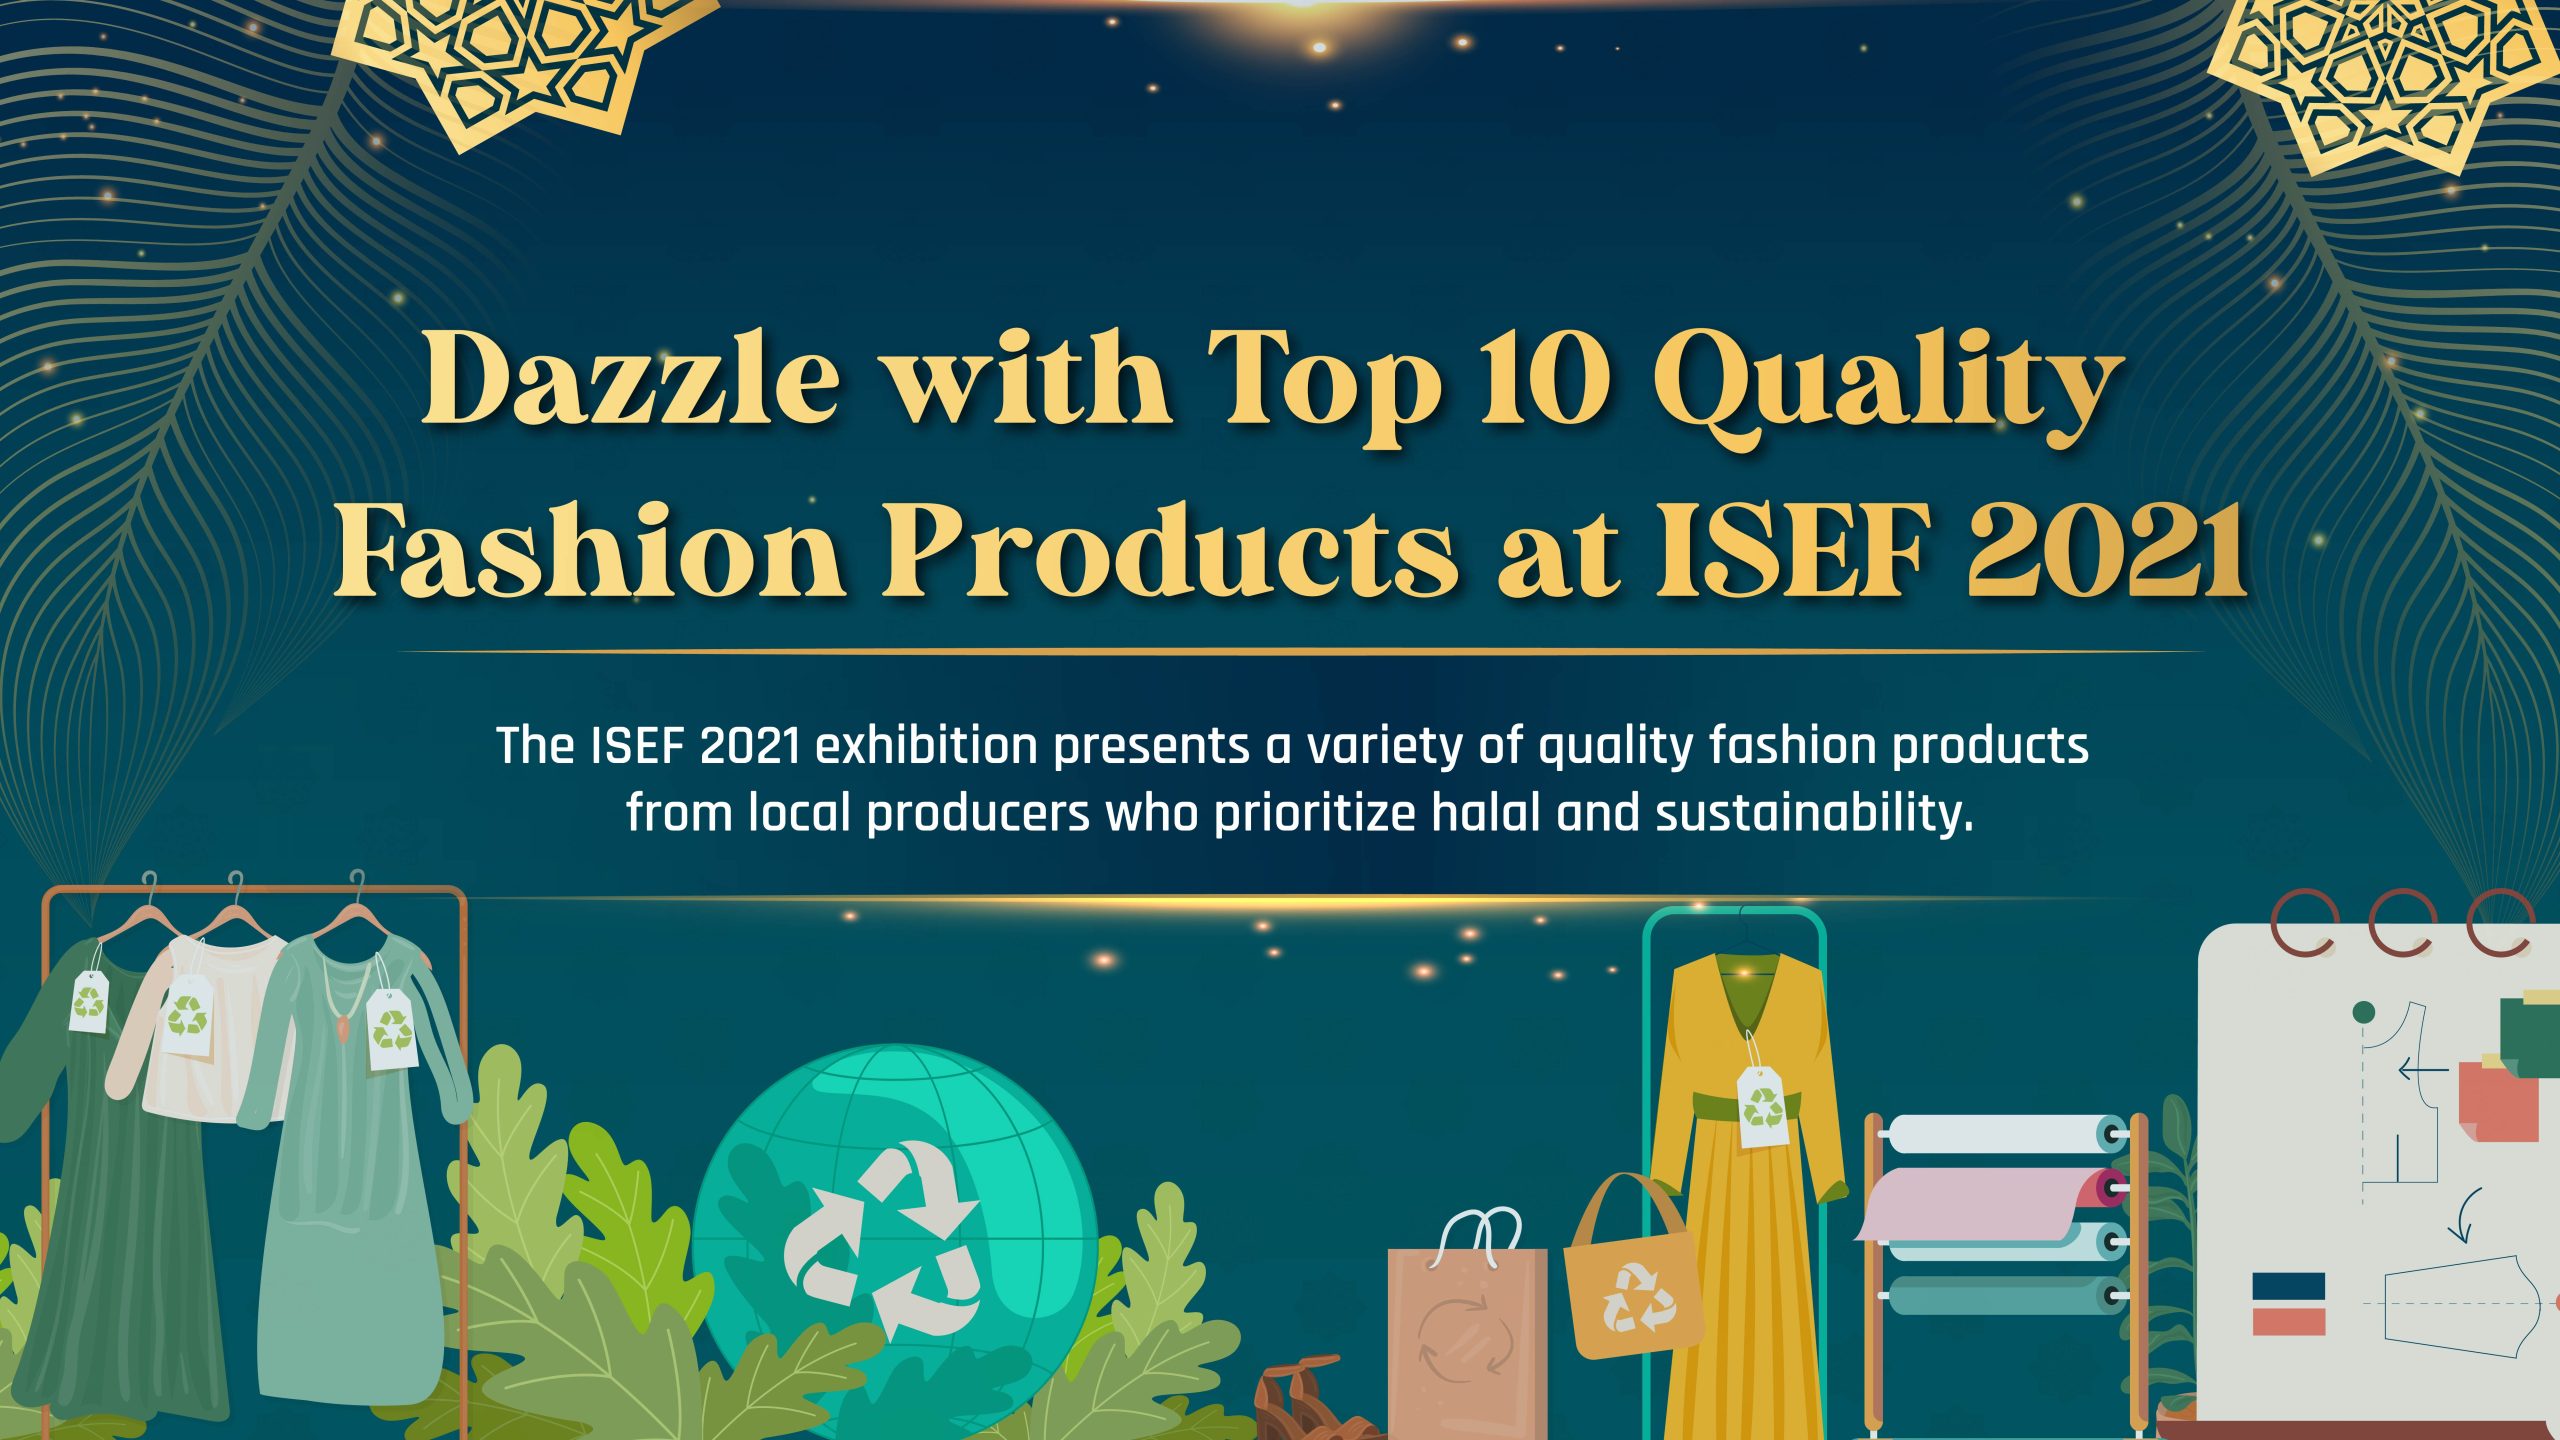 Dazzle with Top 10 Quality Fashion Products at ISEF 2021